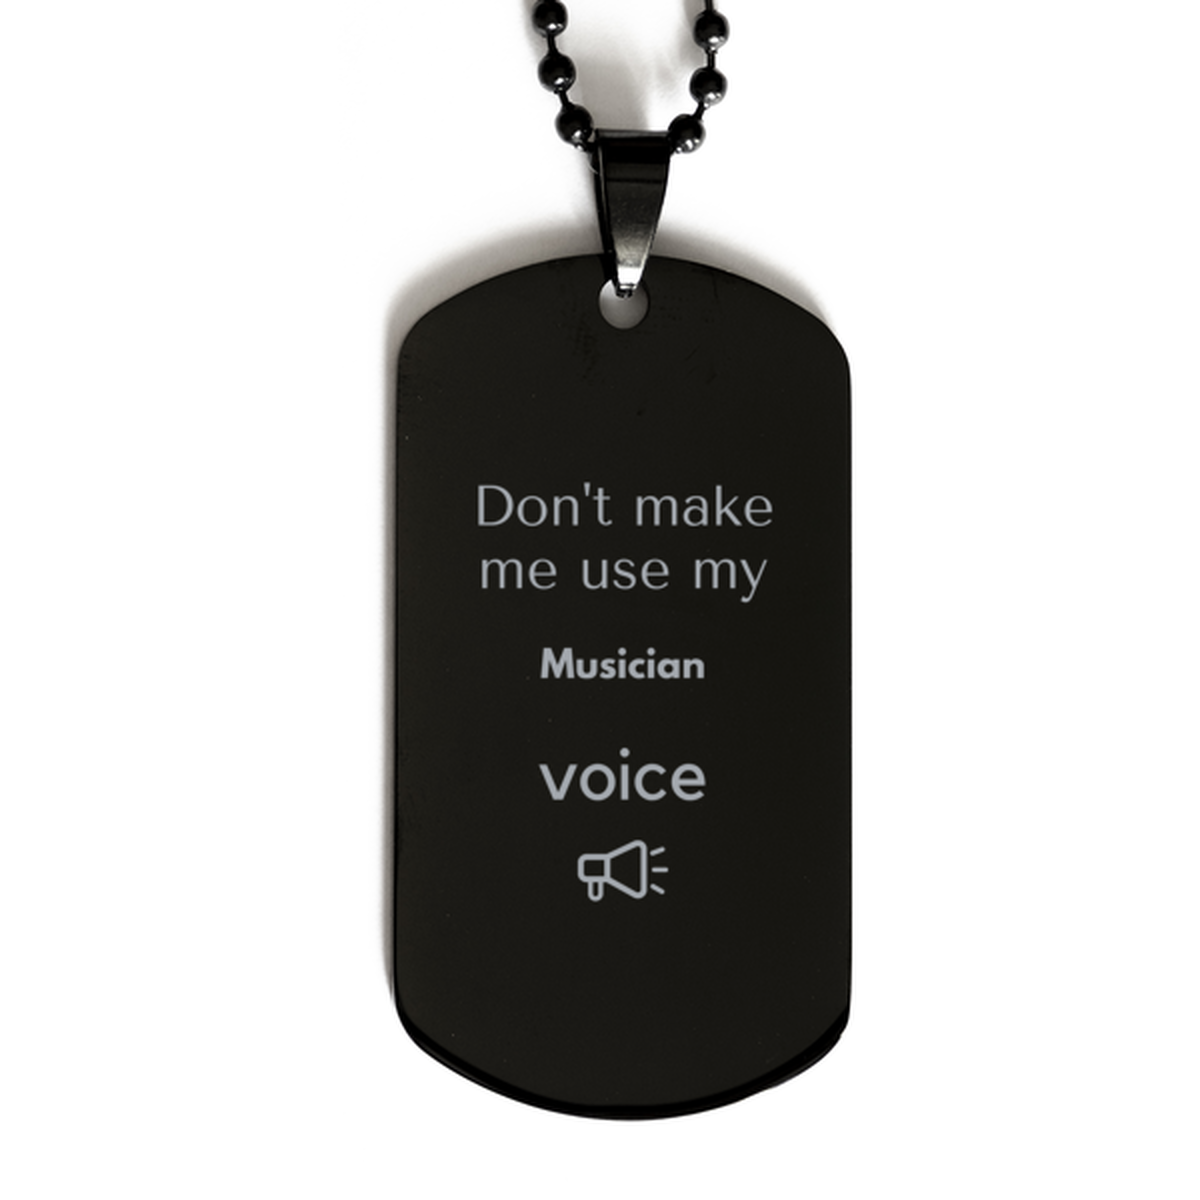 Don't make me use my Musician voice, Sarcasm Musician Gifts, Christmas Musician Black Dog Tag Birthday Unique Gifts For Musician Coworkers, Men, Women, Colleague, Friends